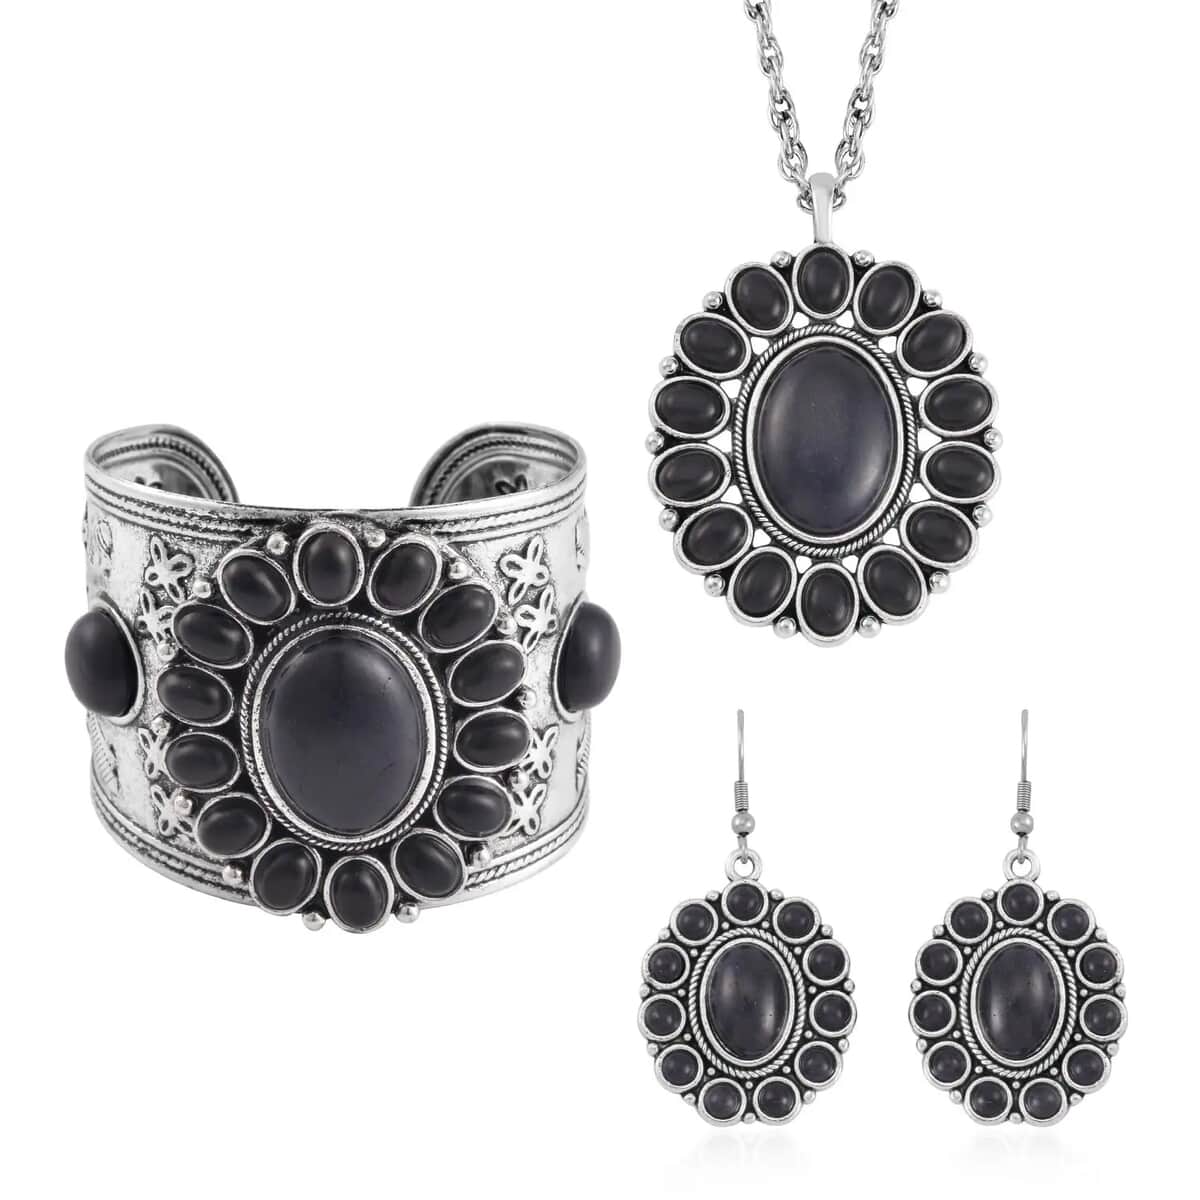 Black Howlite Gemstone 219.00 ctw Floral Cuff Bracelet 7.50-8.50 Inch, Earrings and Pendant Necklace in Silvertone 26-30 Inches image number 0